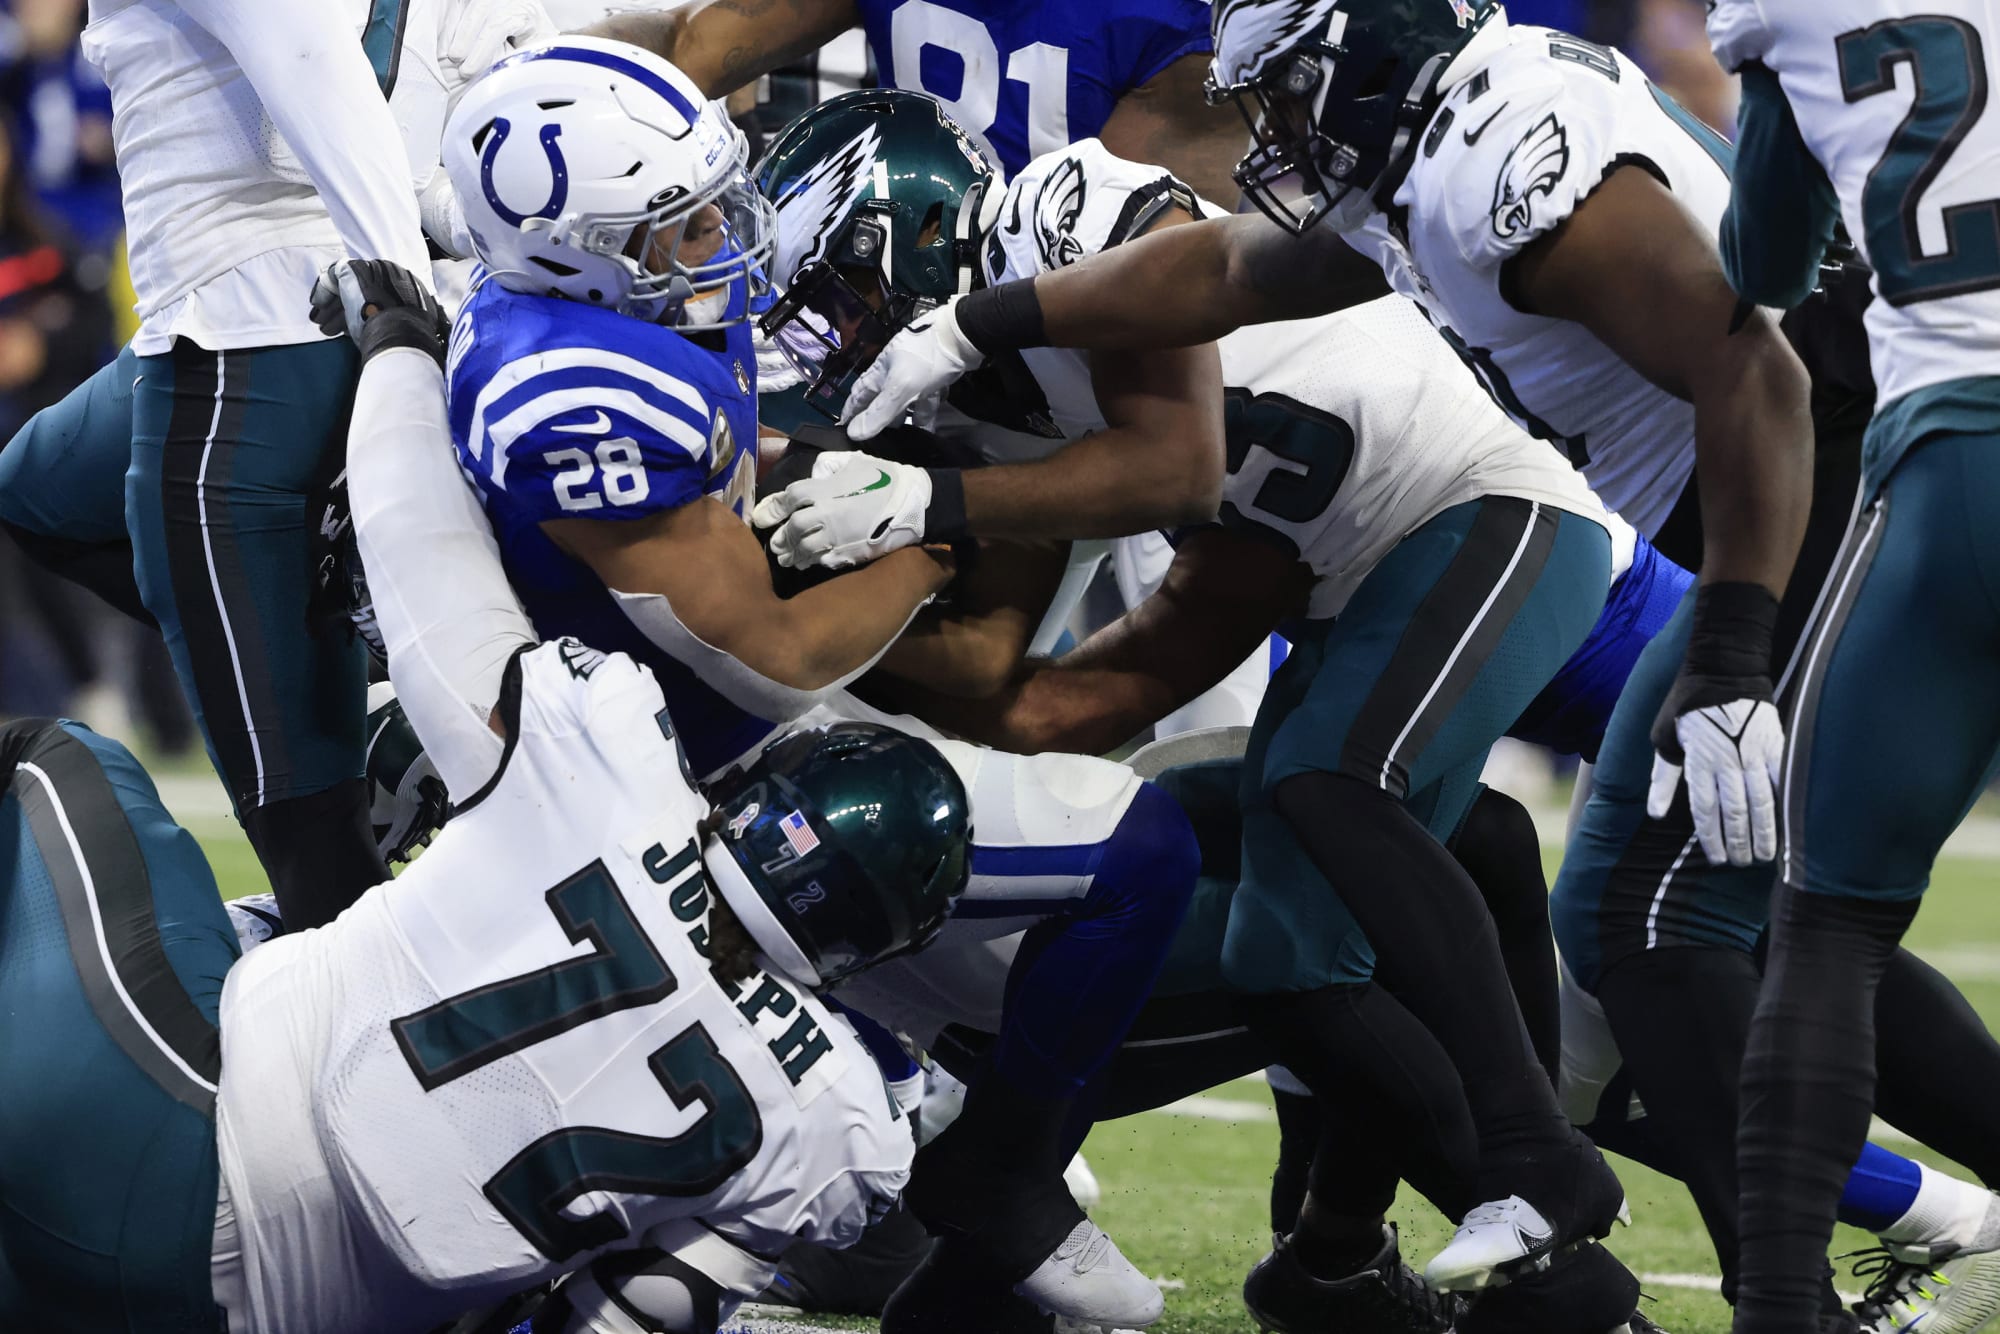 State of the NFC East: Ranking the Eagles defense vs rival units